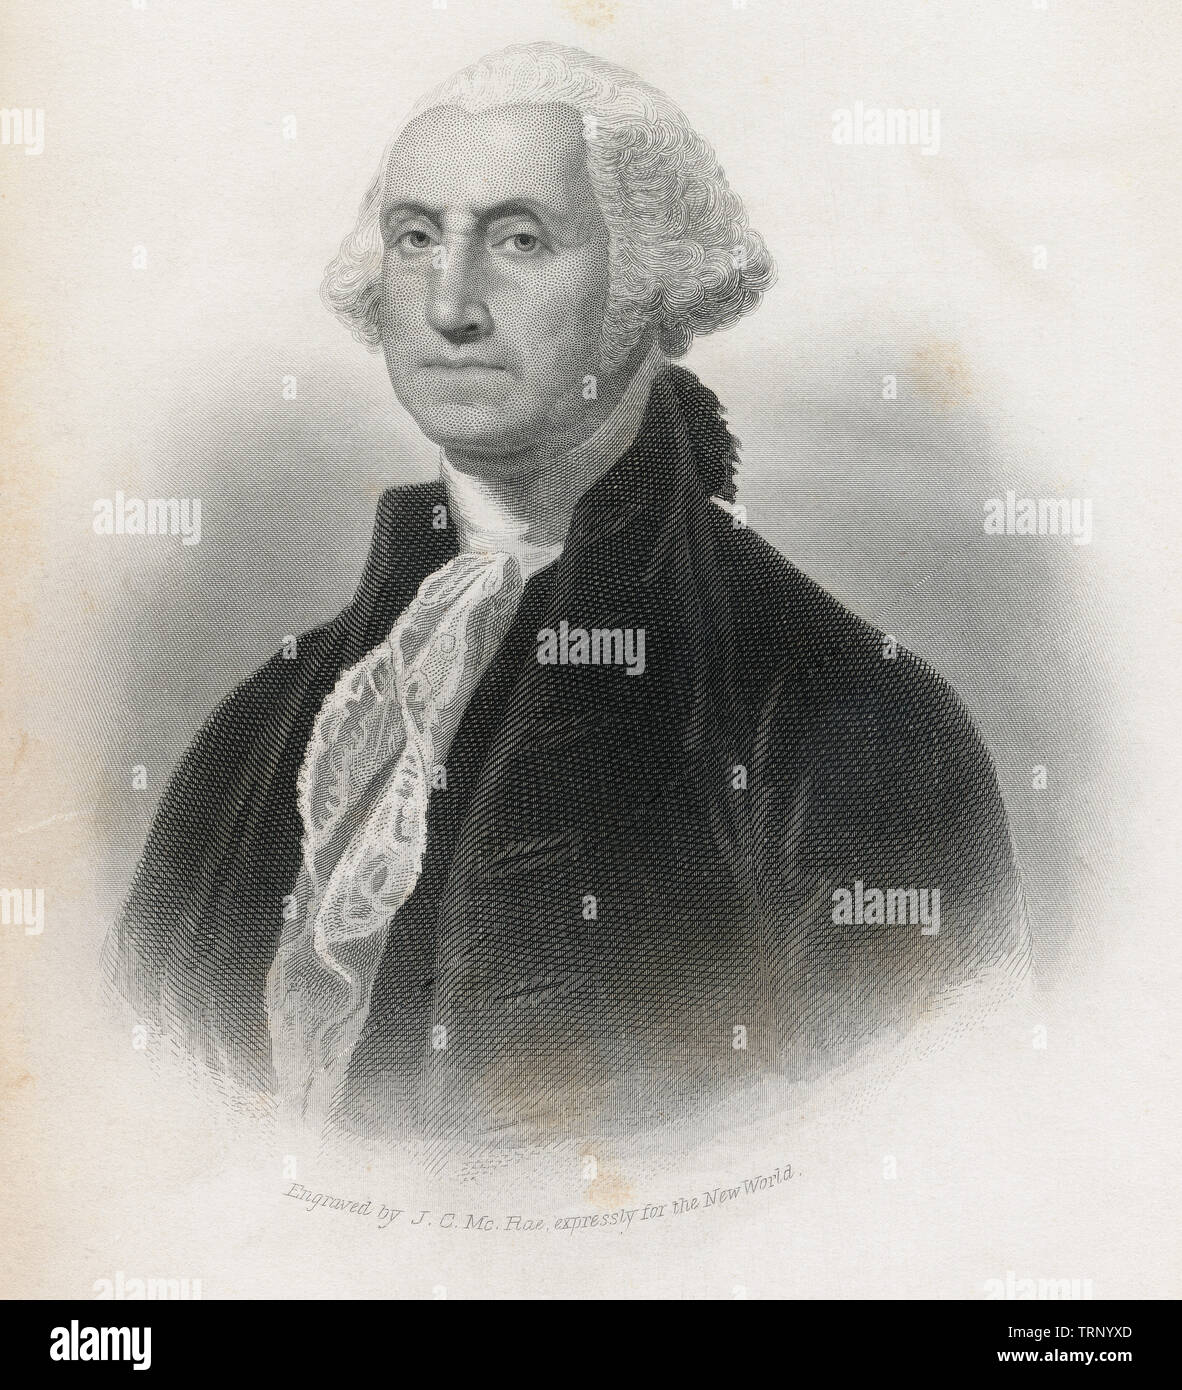 Antique 1873 steel engraving of George Washington. Engraved by J.C. McRae for The New World. SOURCE: ORIGINAL ENGRAVING Stock Photo